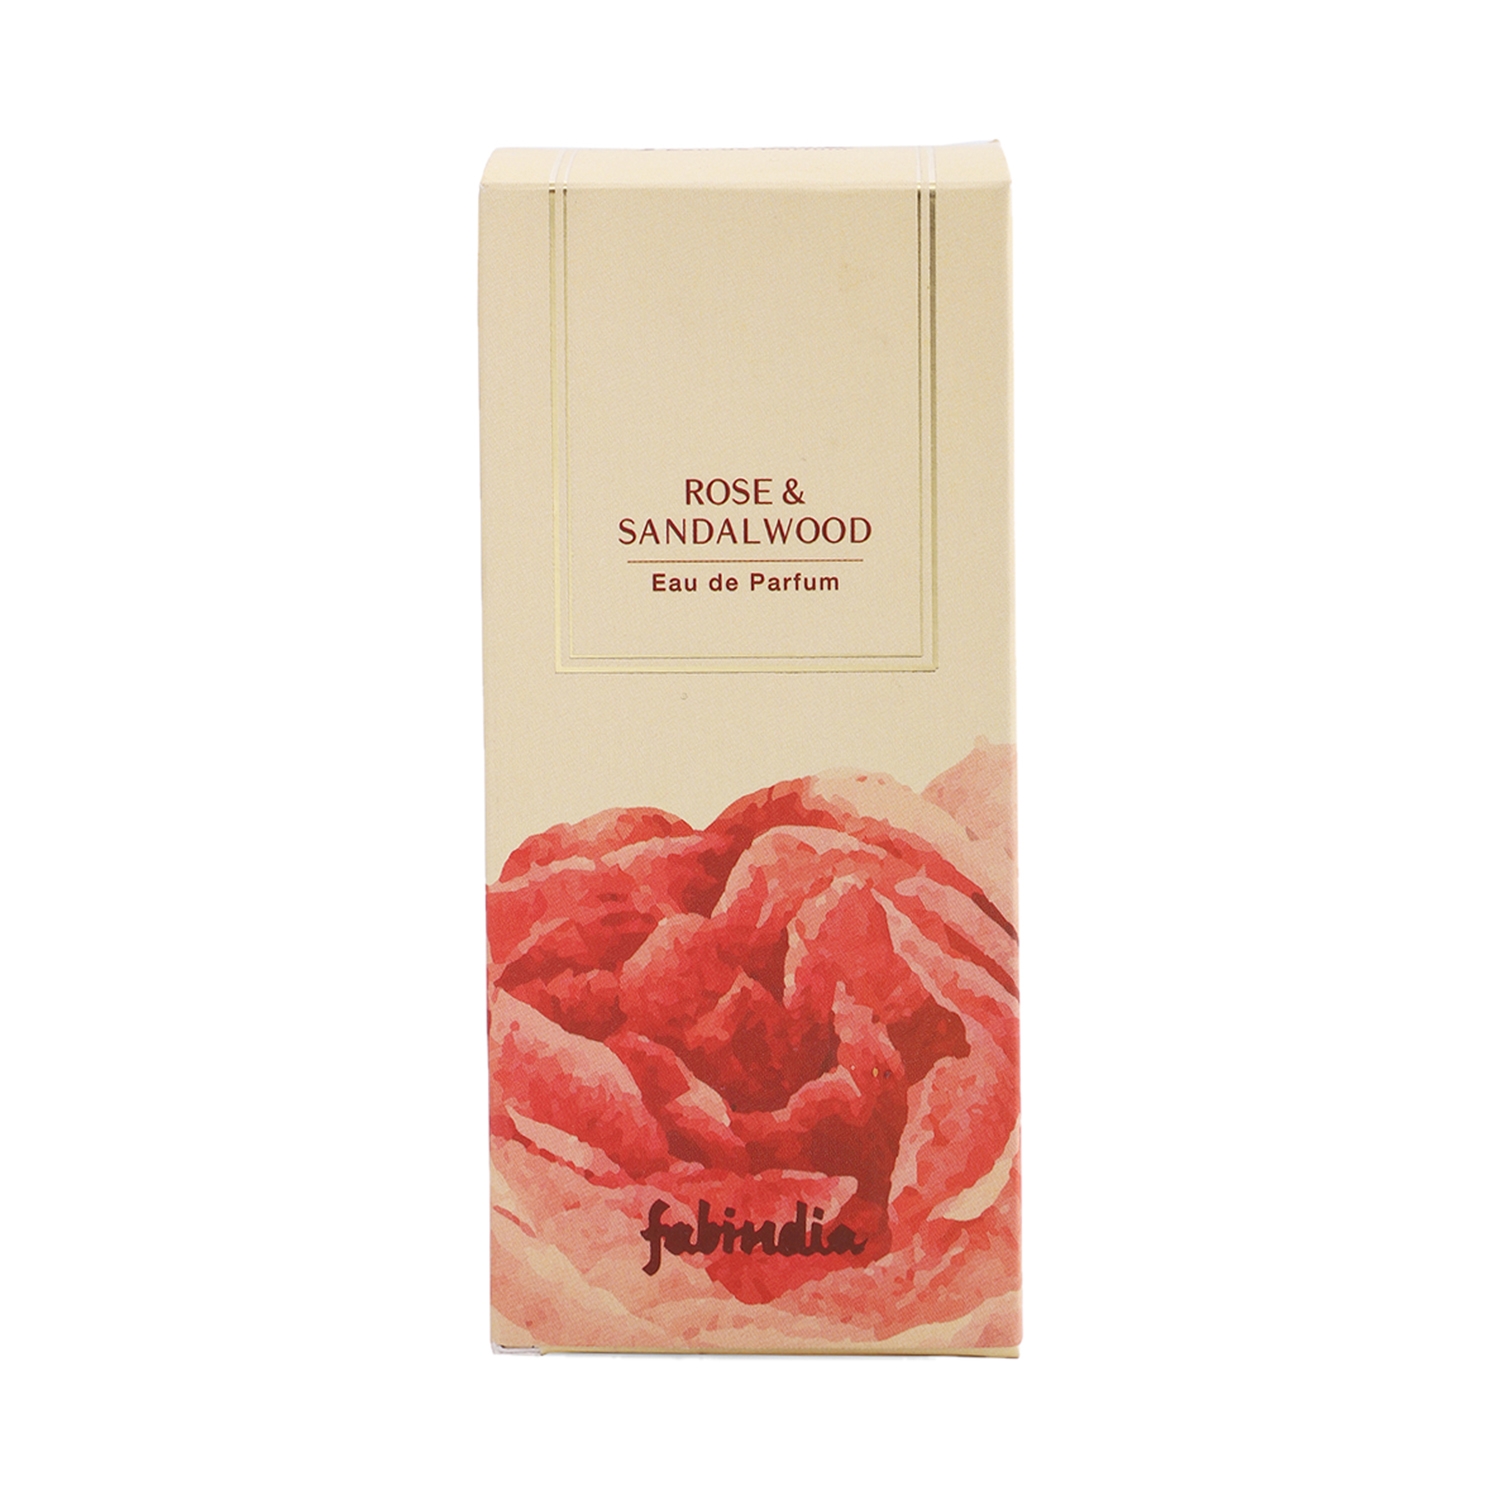 Fabessentials by Fabindia | Fabessentials by Fabindia Eau De Parfum Rose and Sandalwood Perfume (100ml)